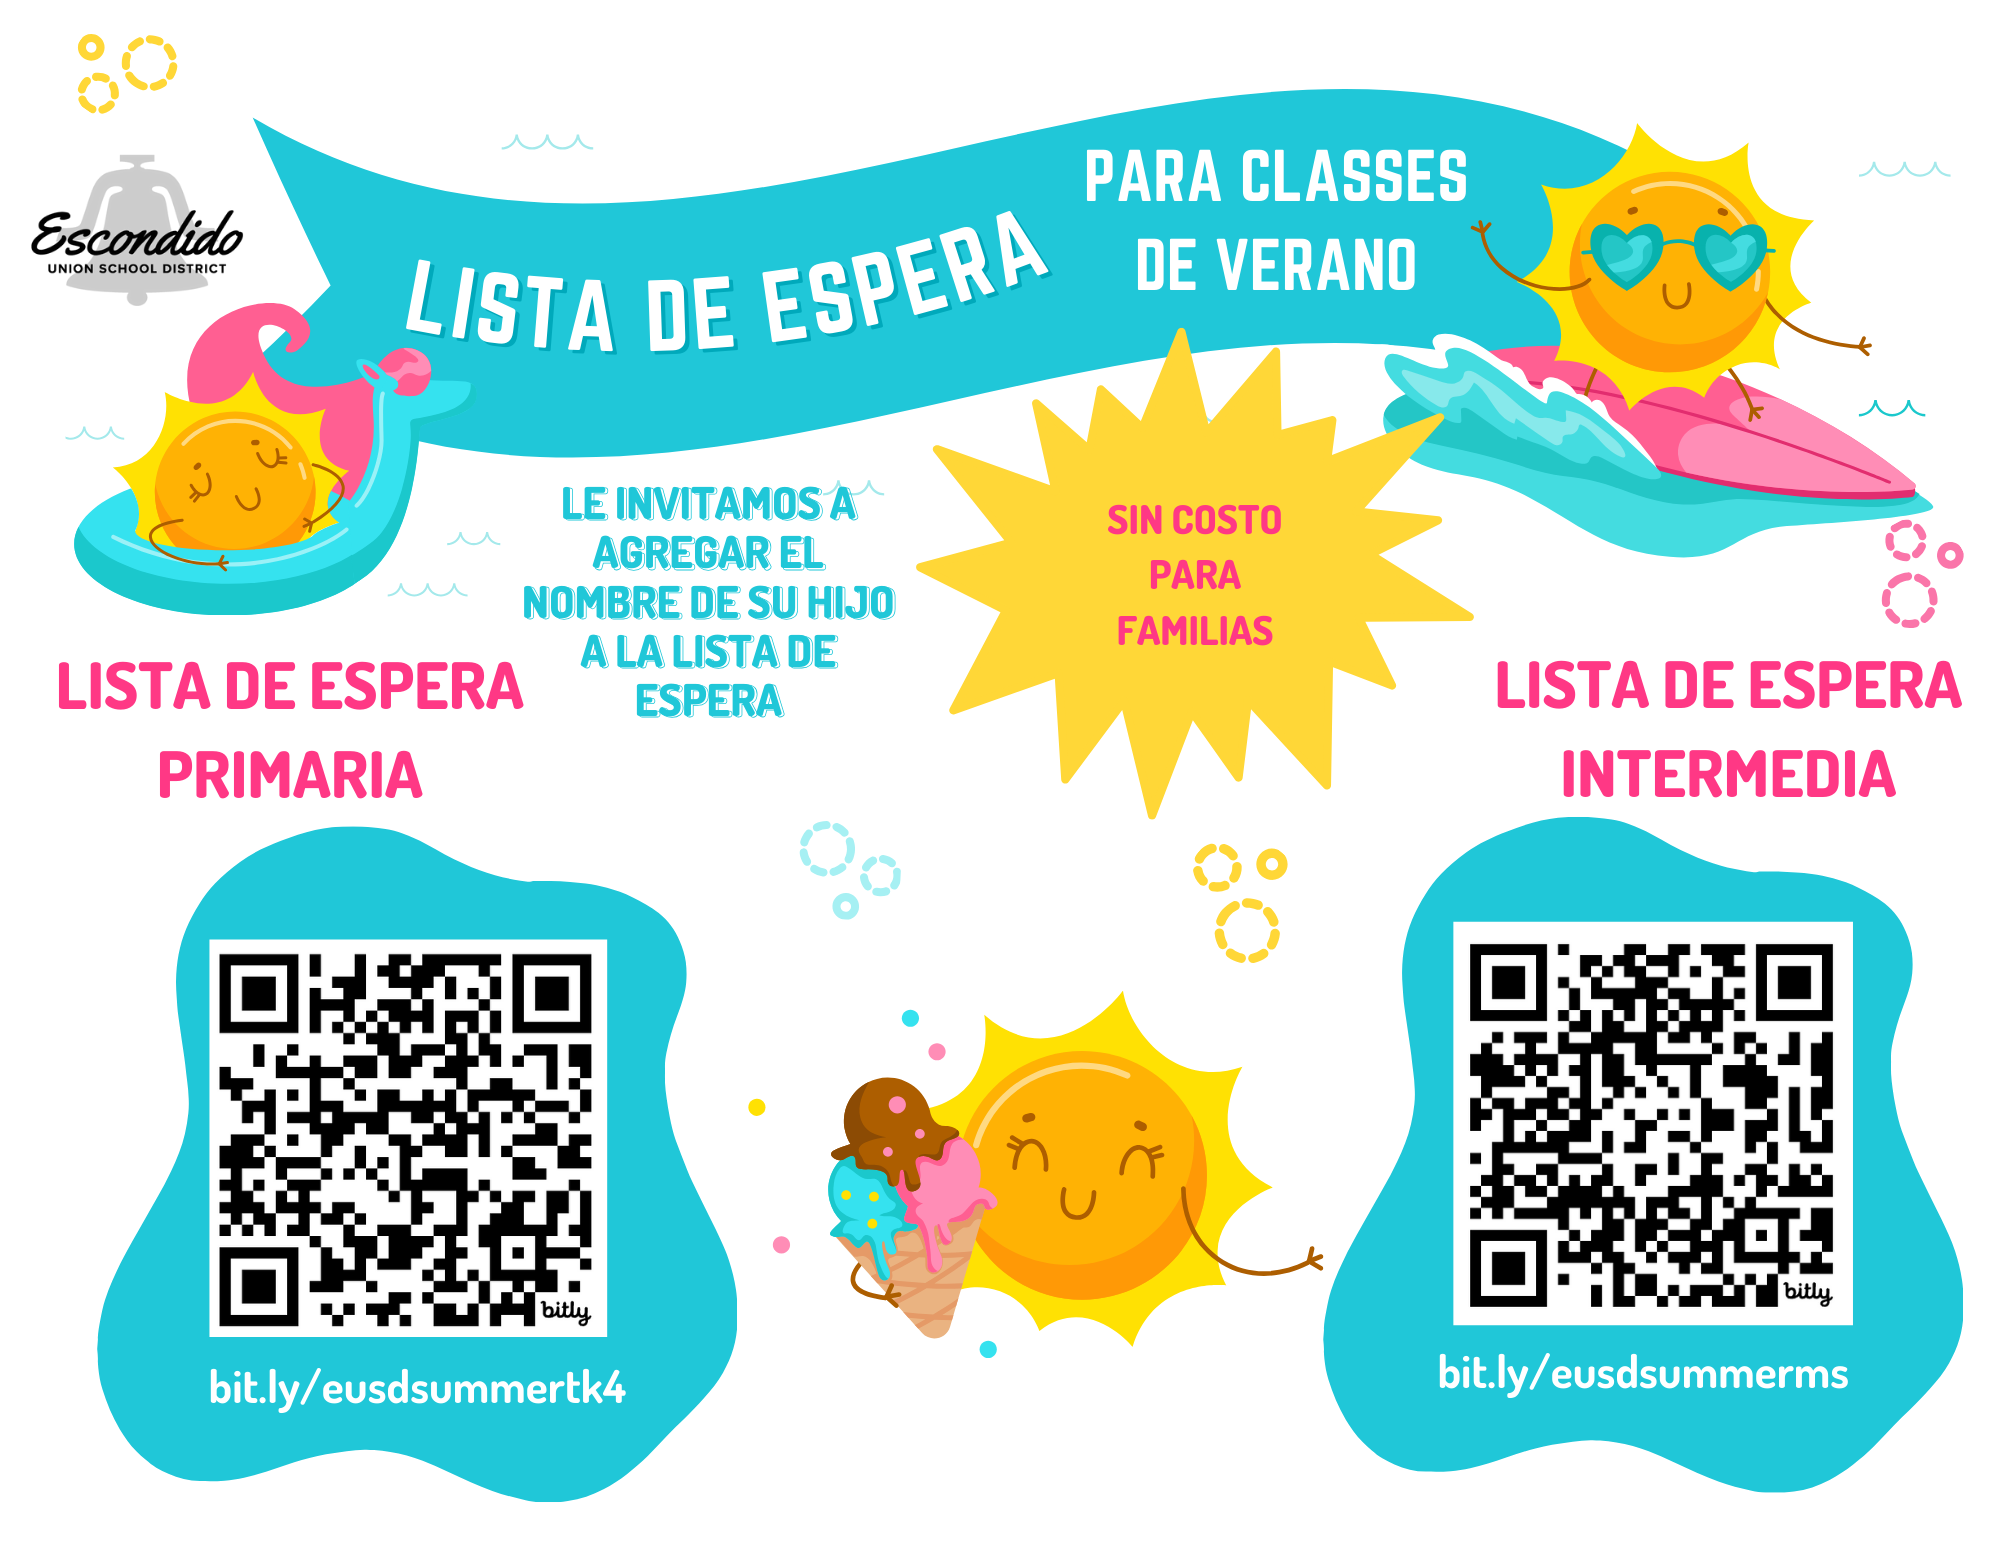 summer program waitlist flyer with qr code to complete the interest form in Spanish